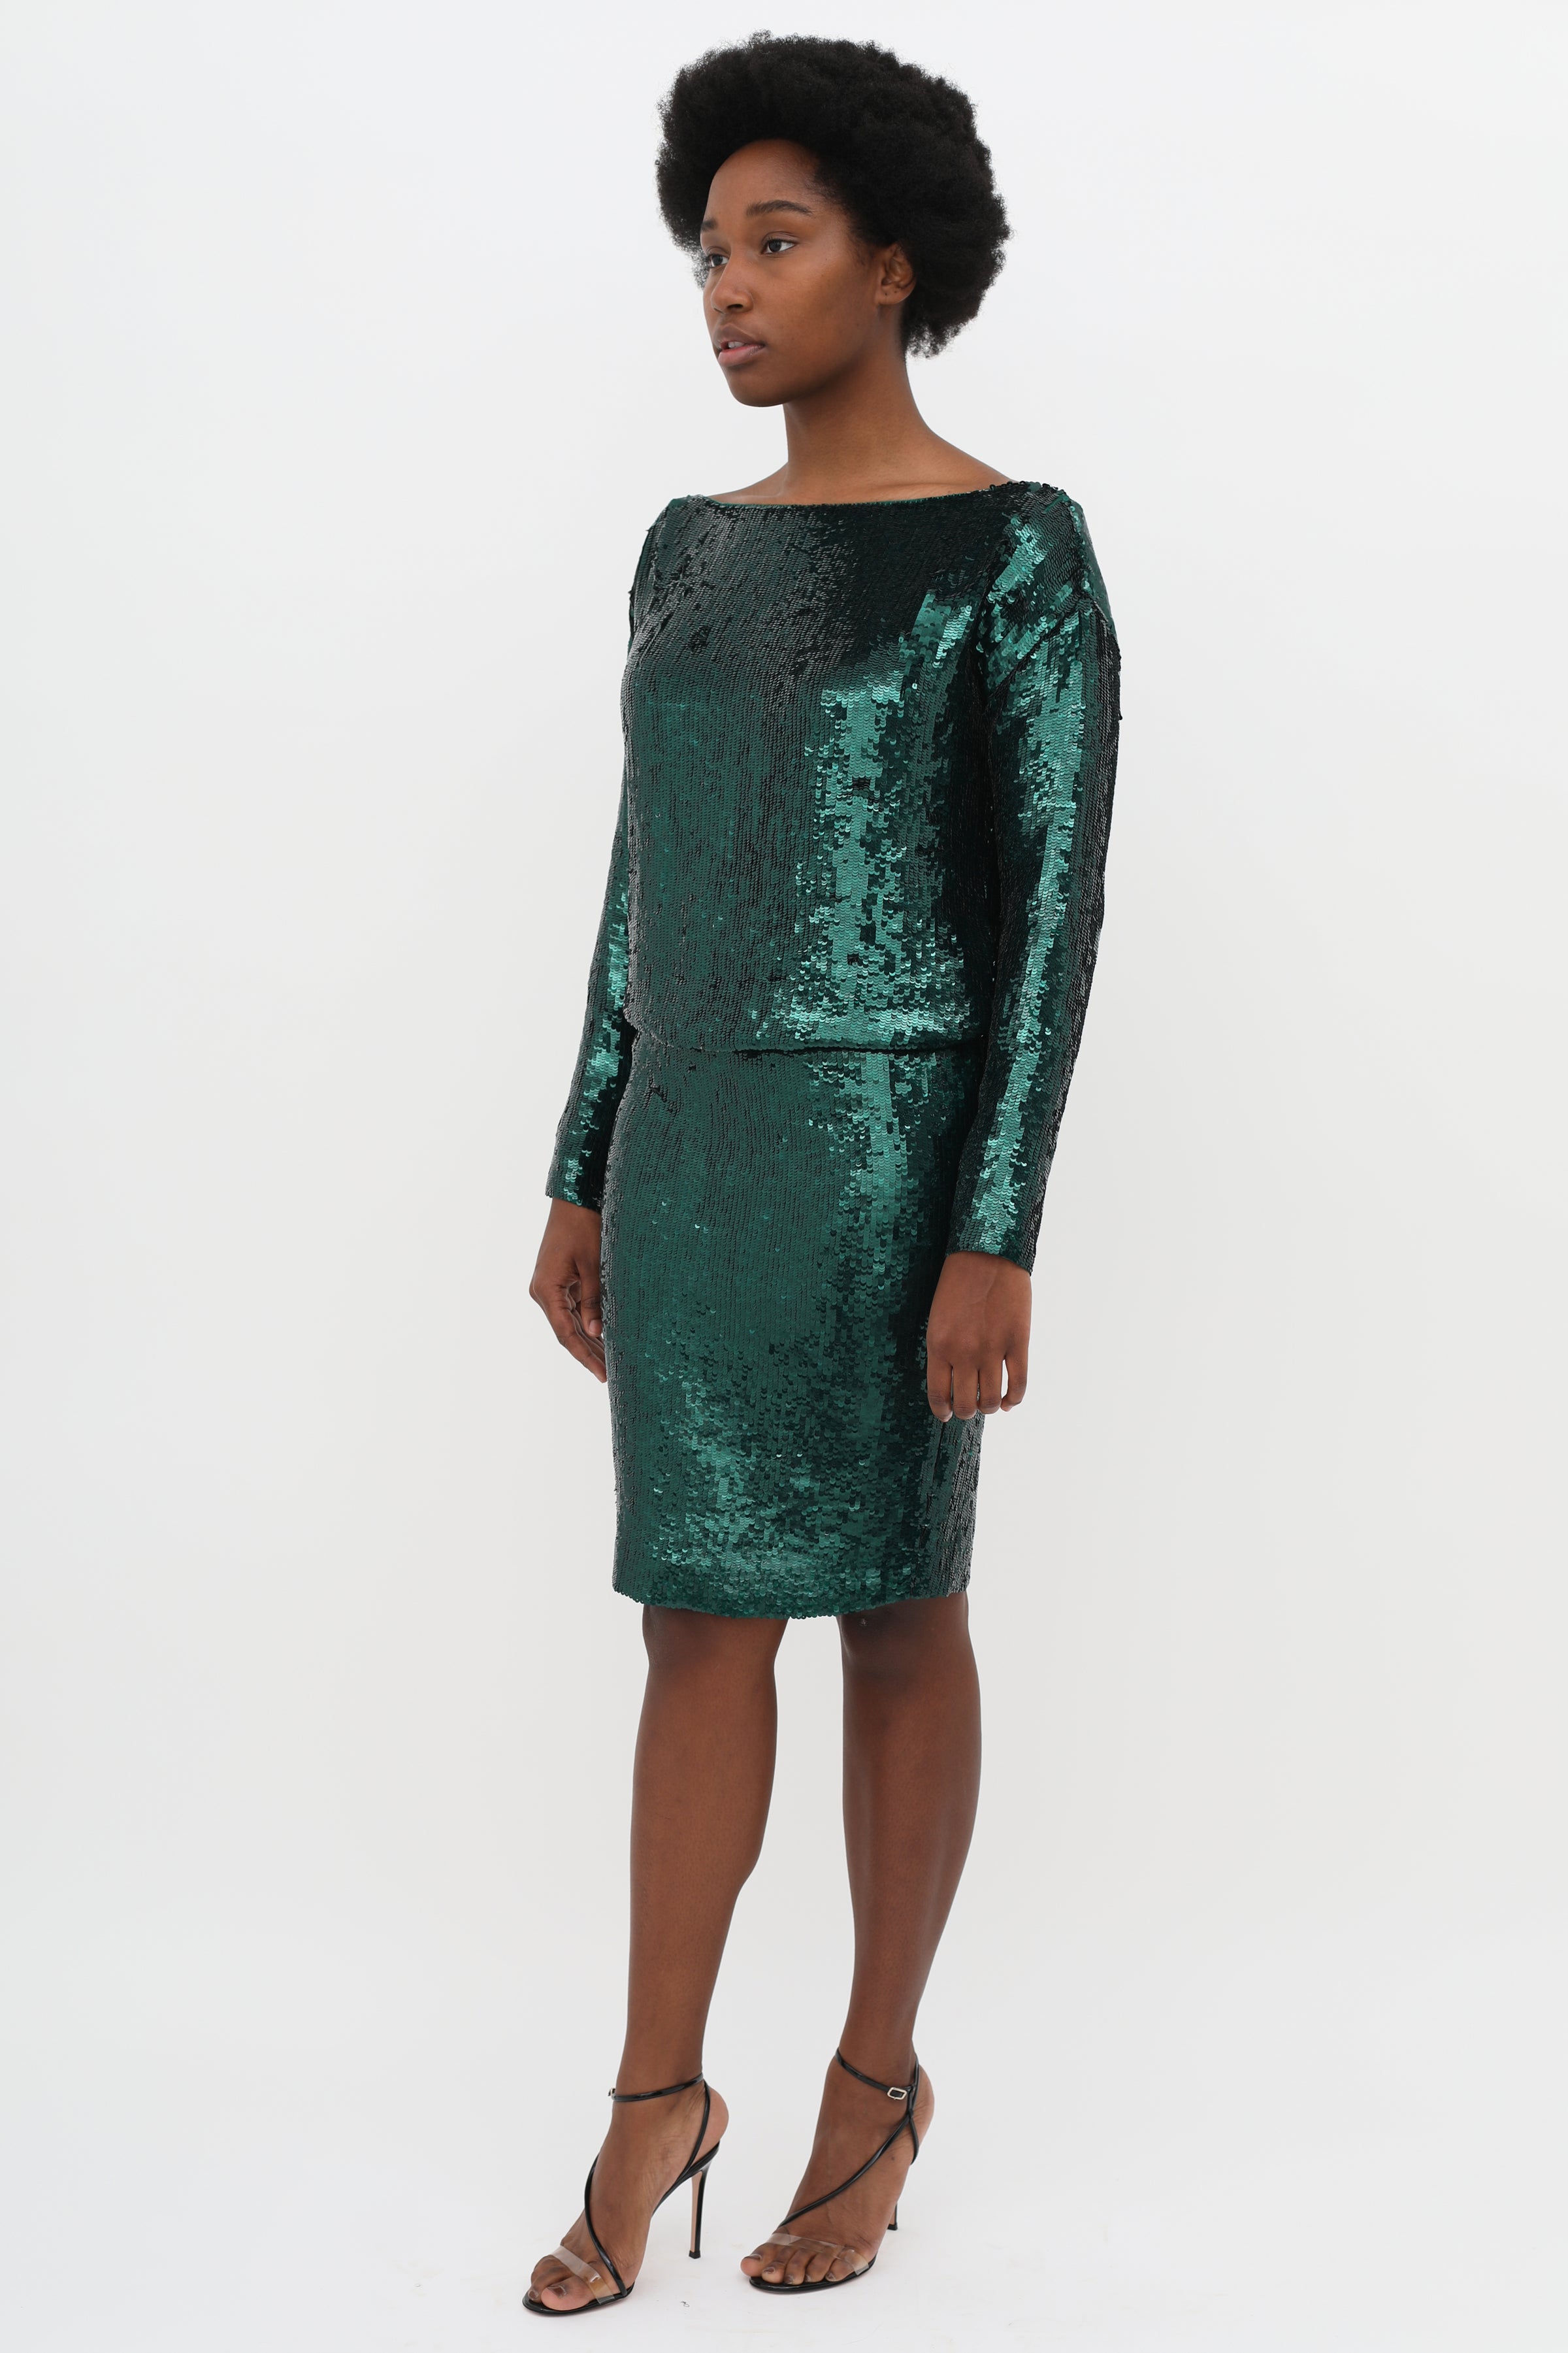 Long sleeve sequin dress outfit